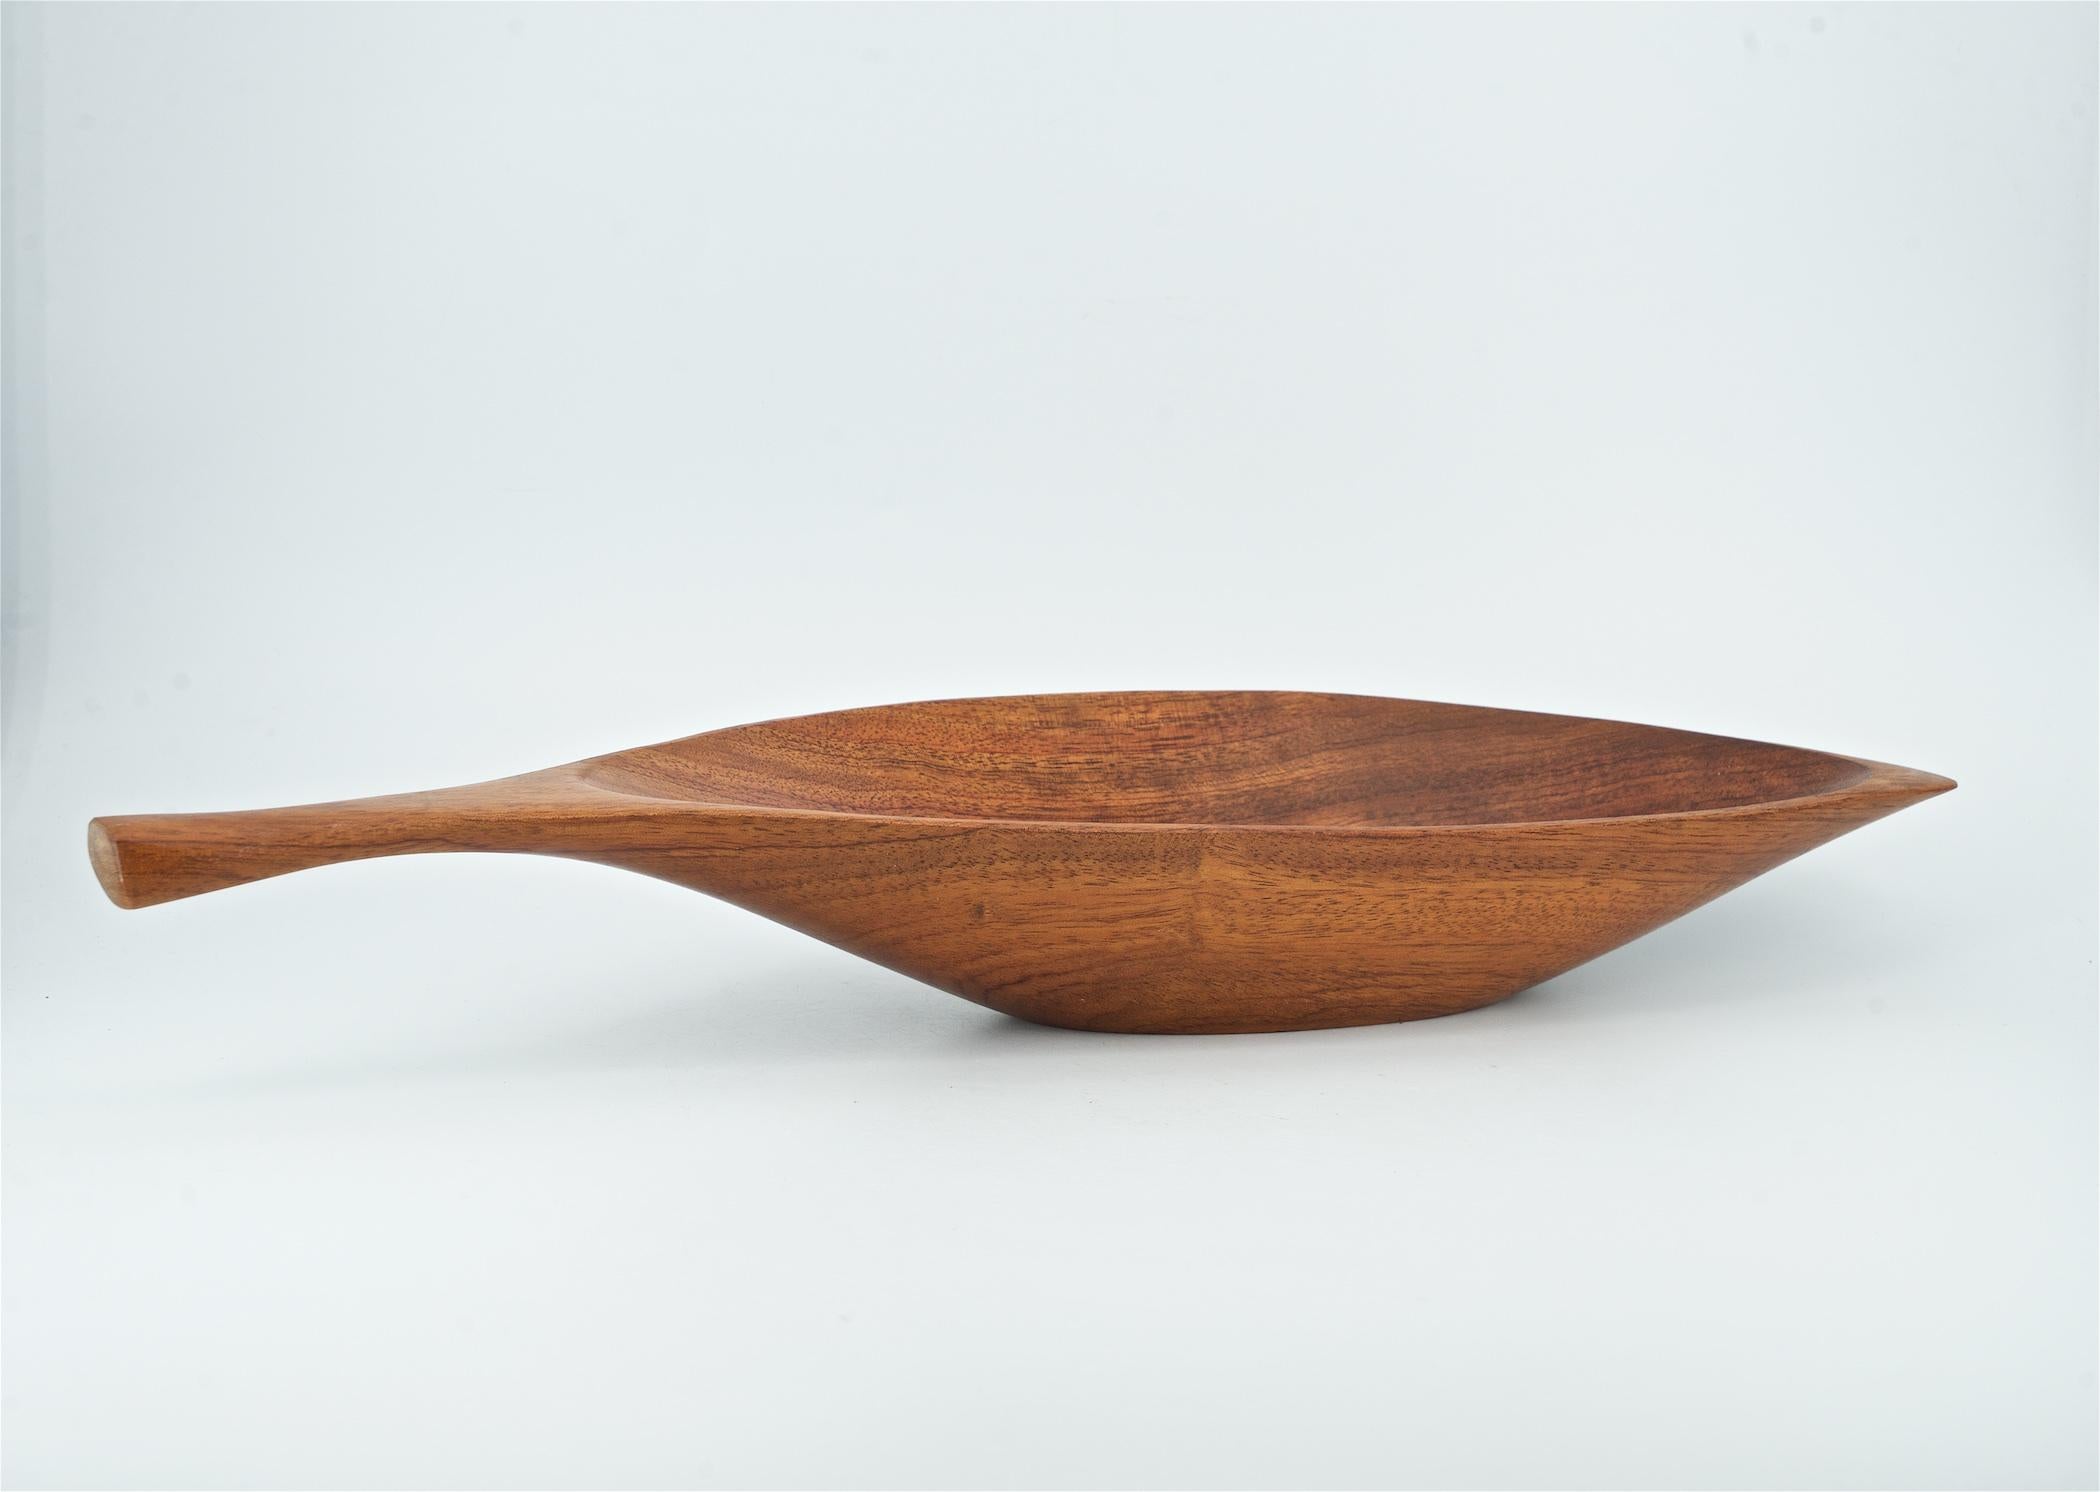 Centerpiece Rare Wood Fruit Bowl Mid 20th Century American Craftsman Design In Good Condition For Sale In Hyattsville, MD